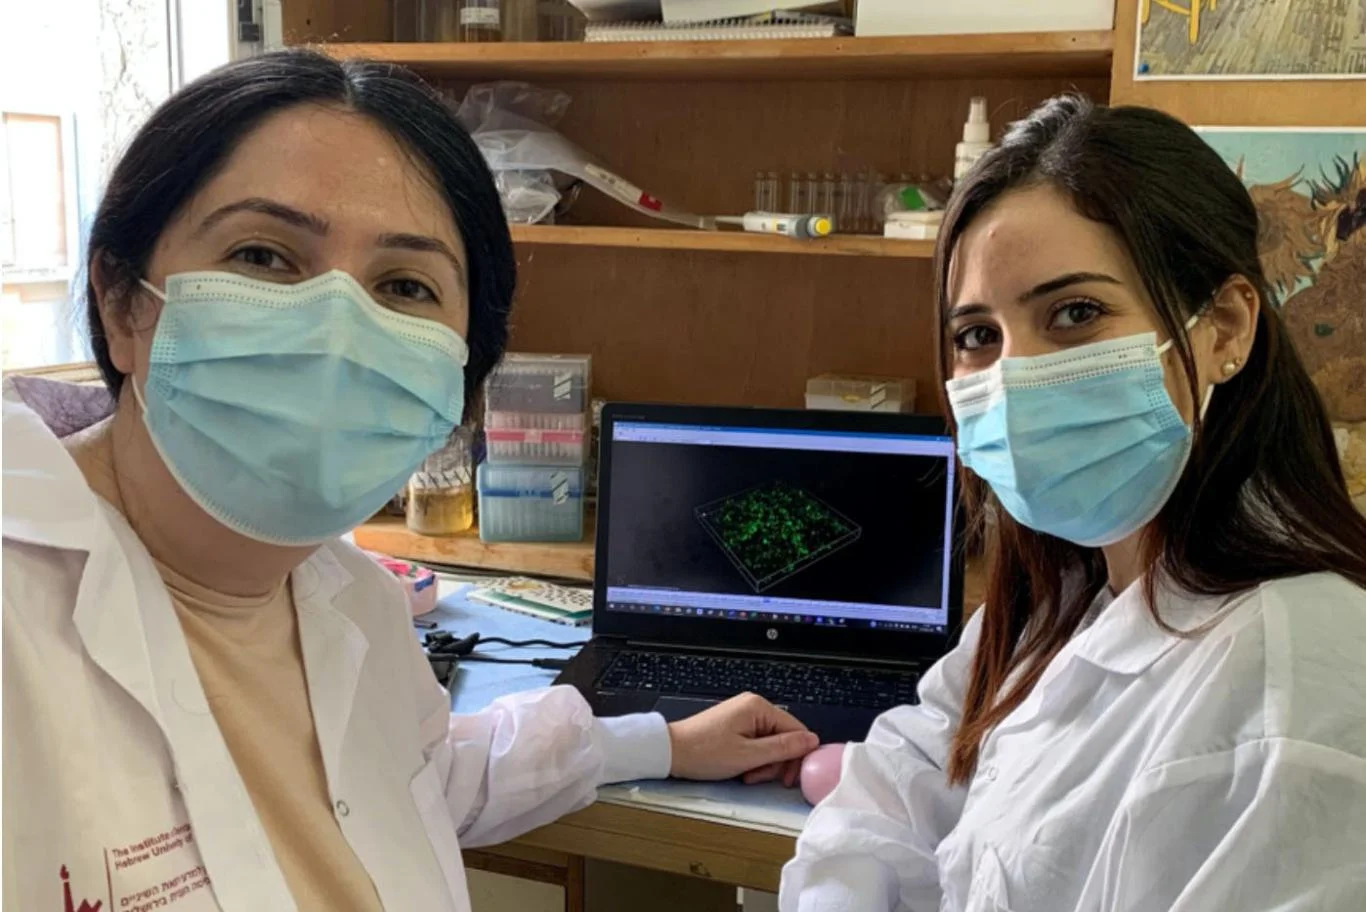 Two of the STEP fellows, Muna and Sarah, while working on their graduate degrees during the pandemic.